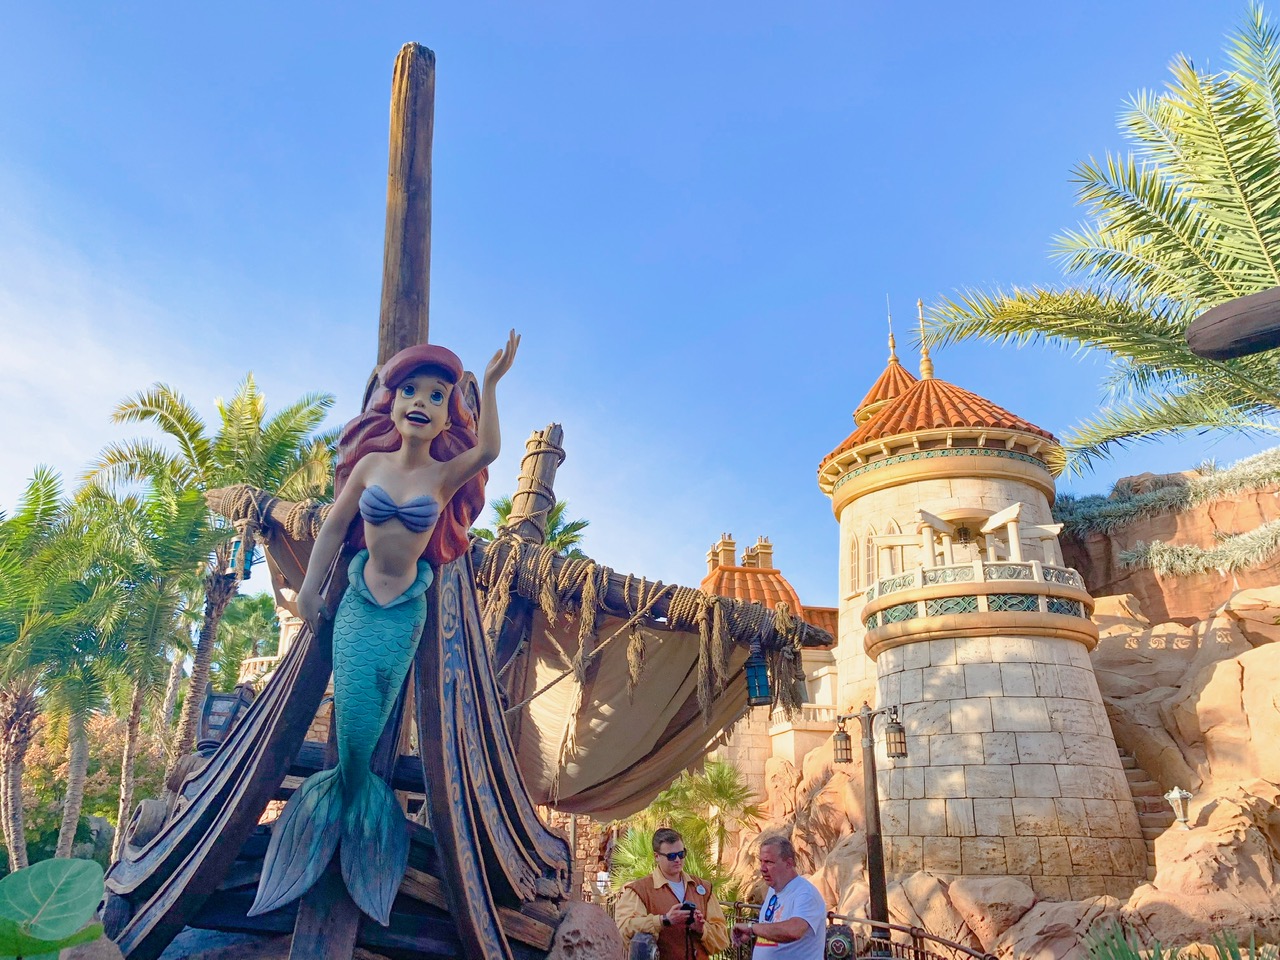 Ariel at the entrance of The Journey of the Little Mermaid ride